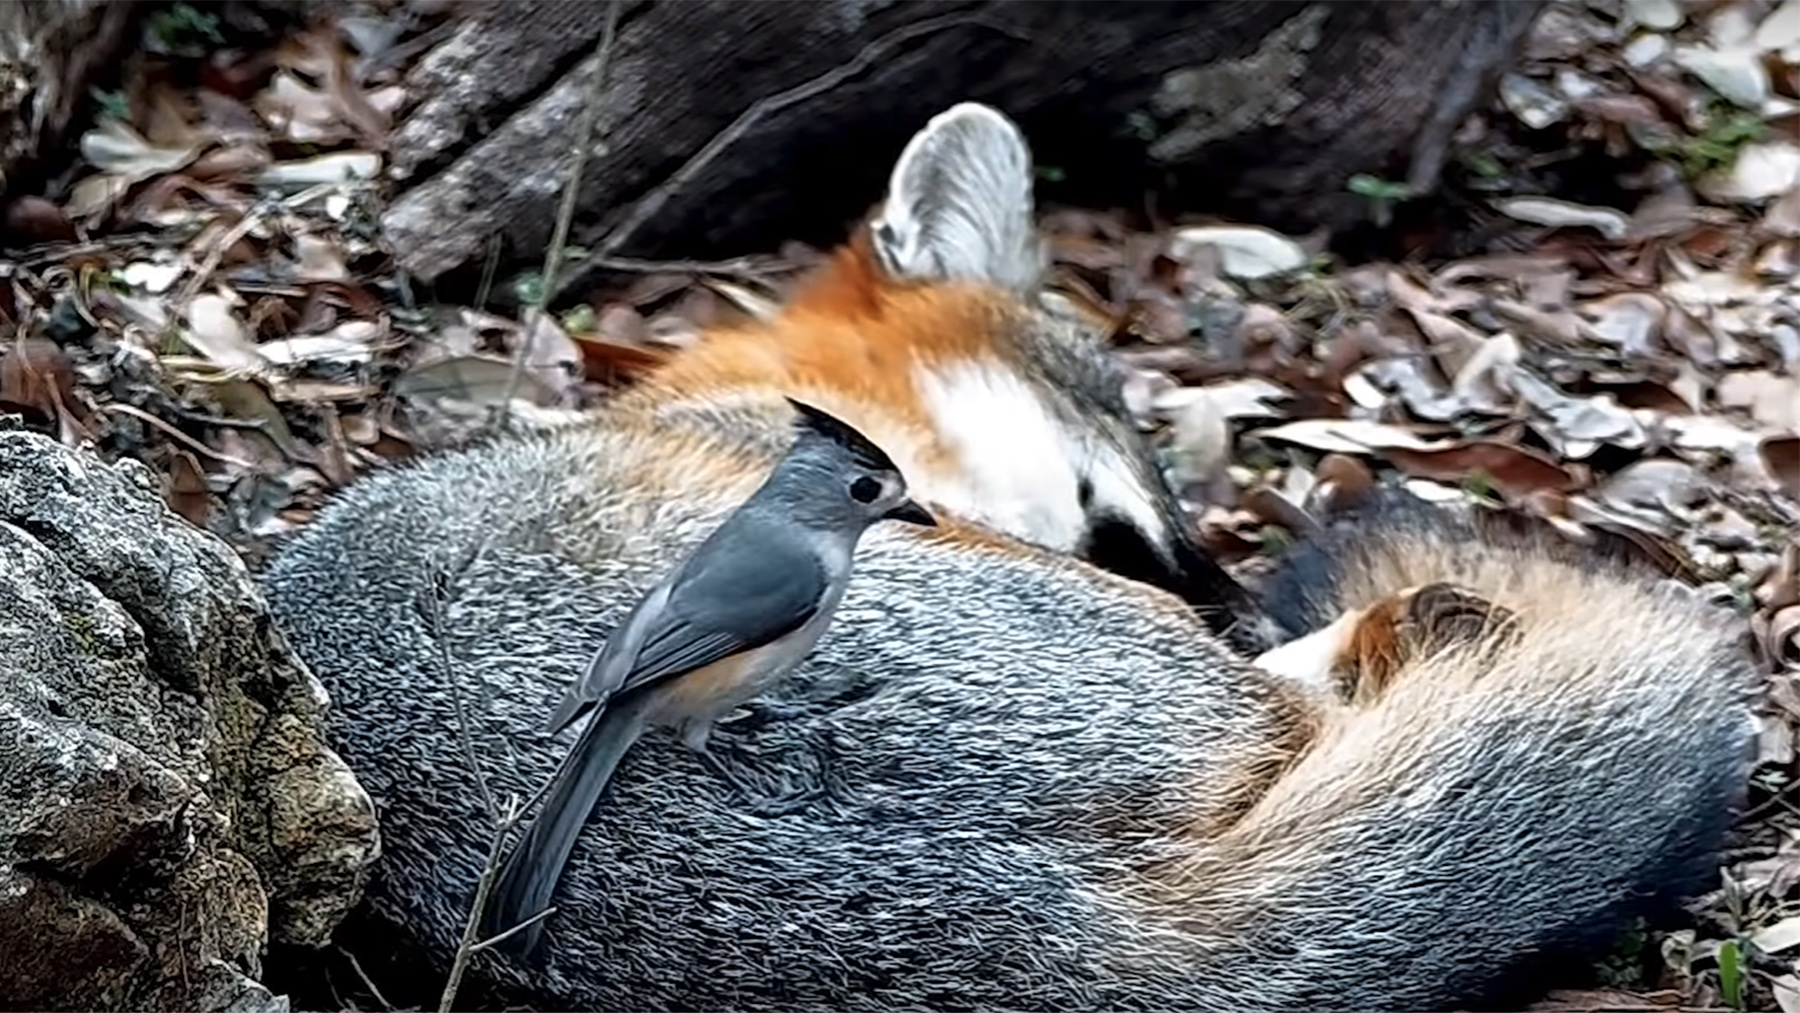 creenshot from a video of a black-crested titmouse stealing fur from a sleeping fox, from the YouTube channel Texas Backyard Wildlife.     Photo courtesy Texas Backyard Wildlife